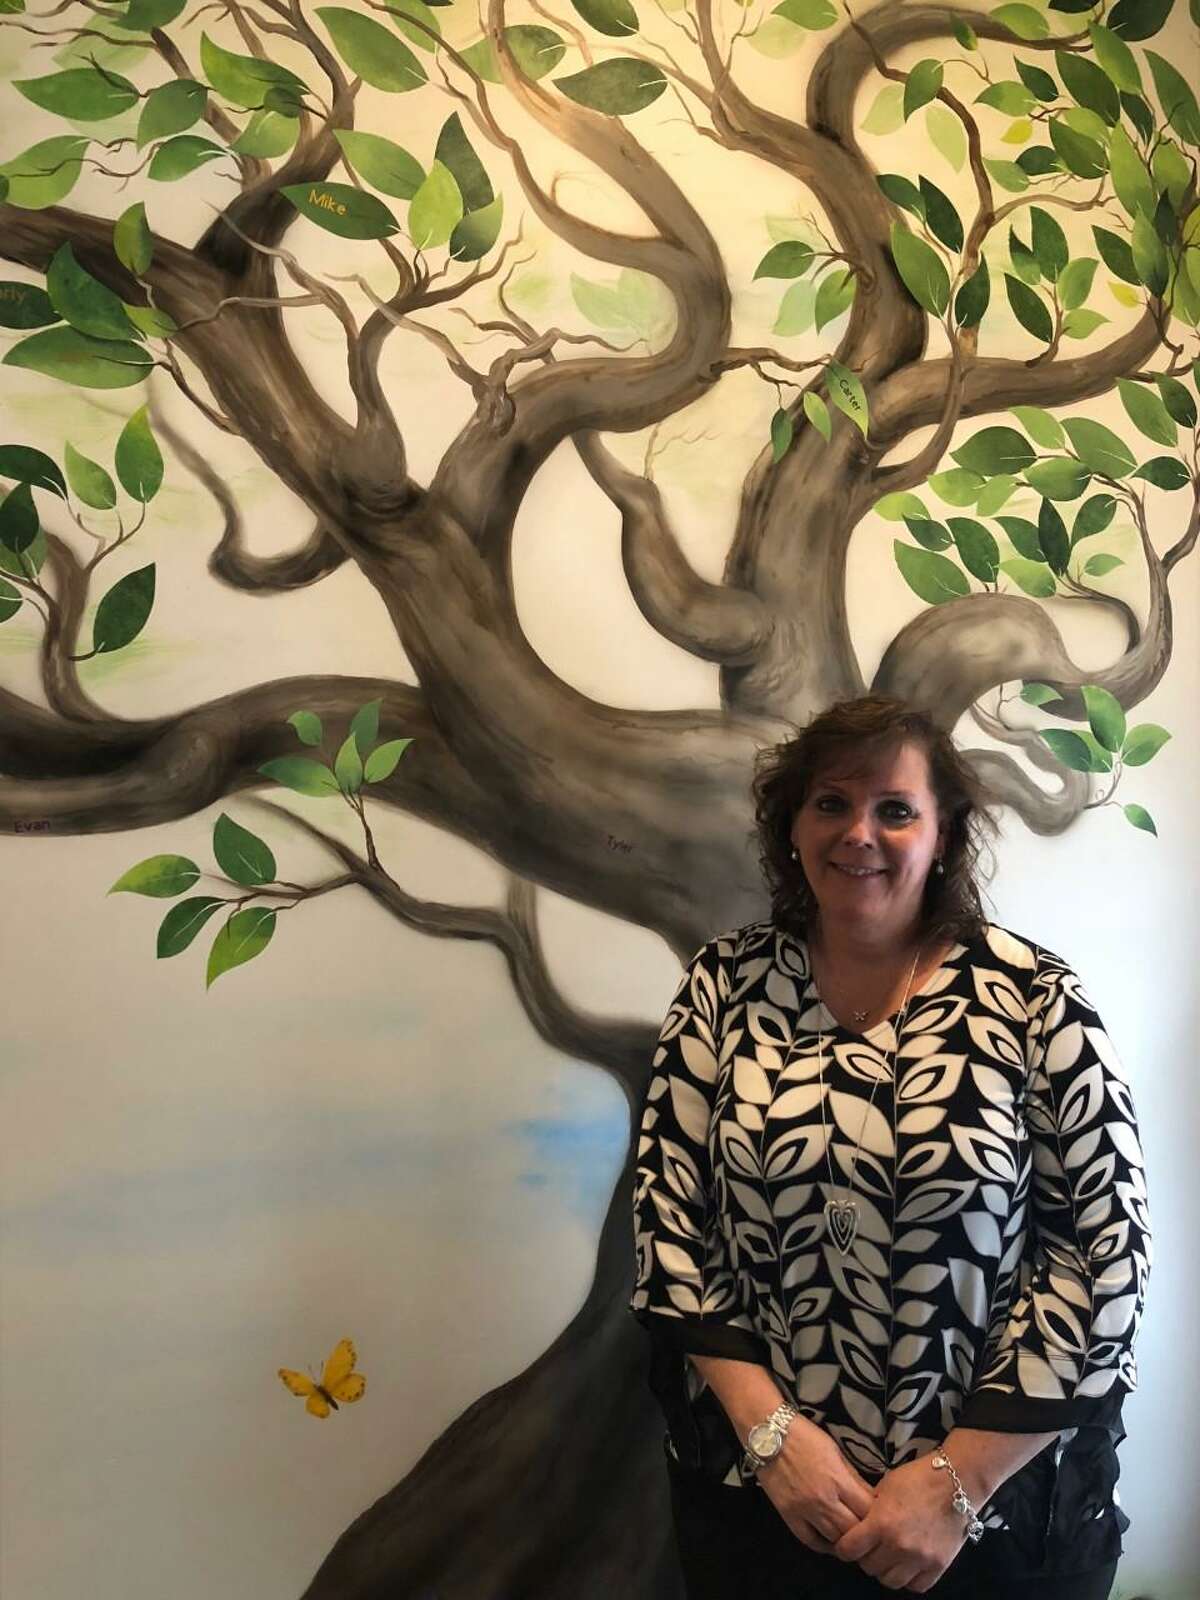 Allison Wysota is founder of Adams House, which offers grief education and peer support programs to children and their families in a comfortable home setting.